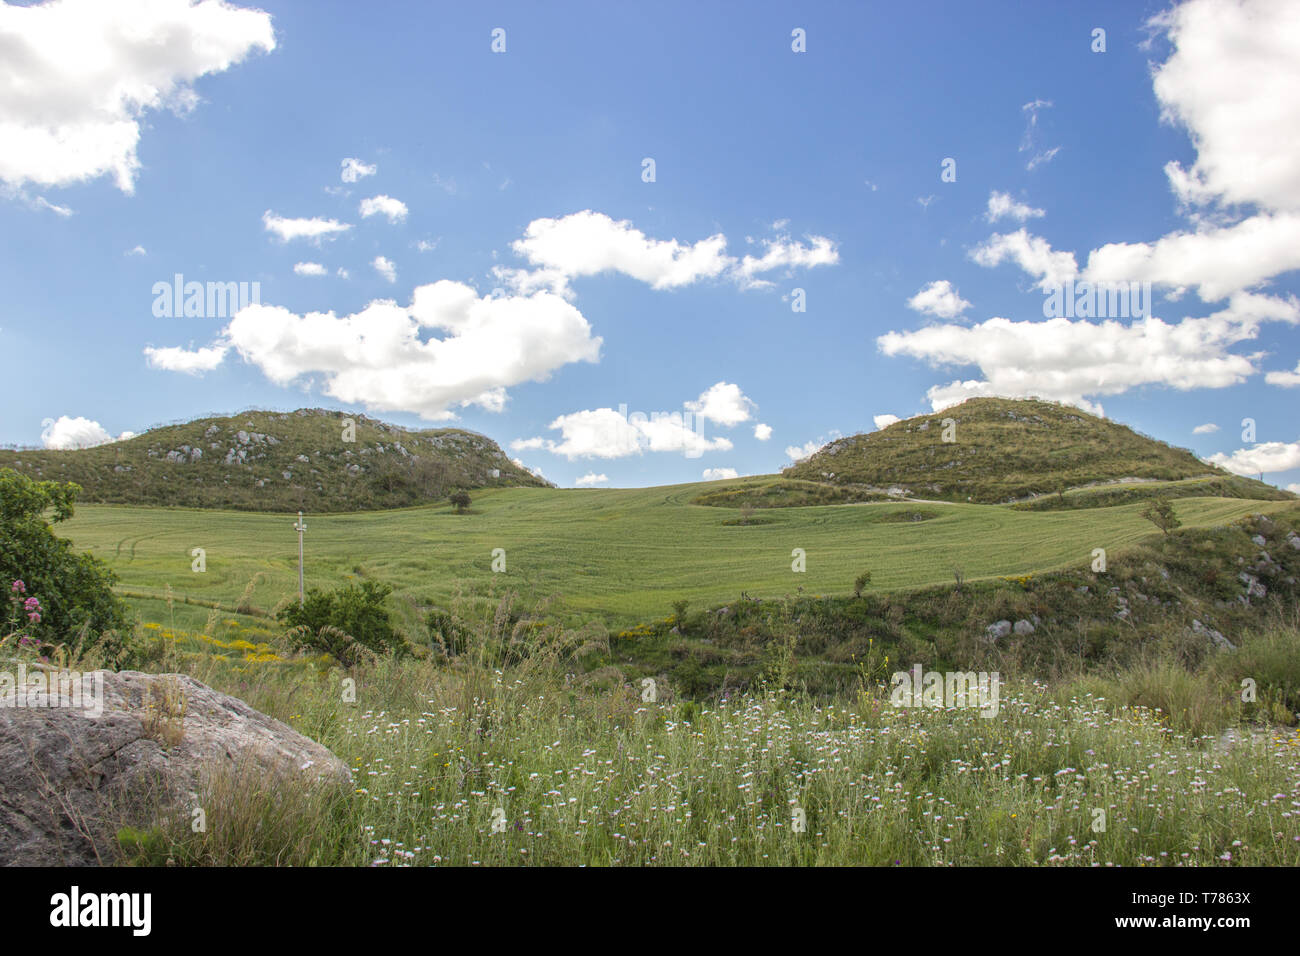 Scenic rural landscape close up, far hills in the green grass and blue sky in spring Stock Photo